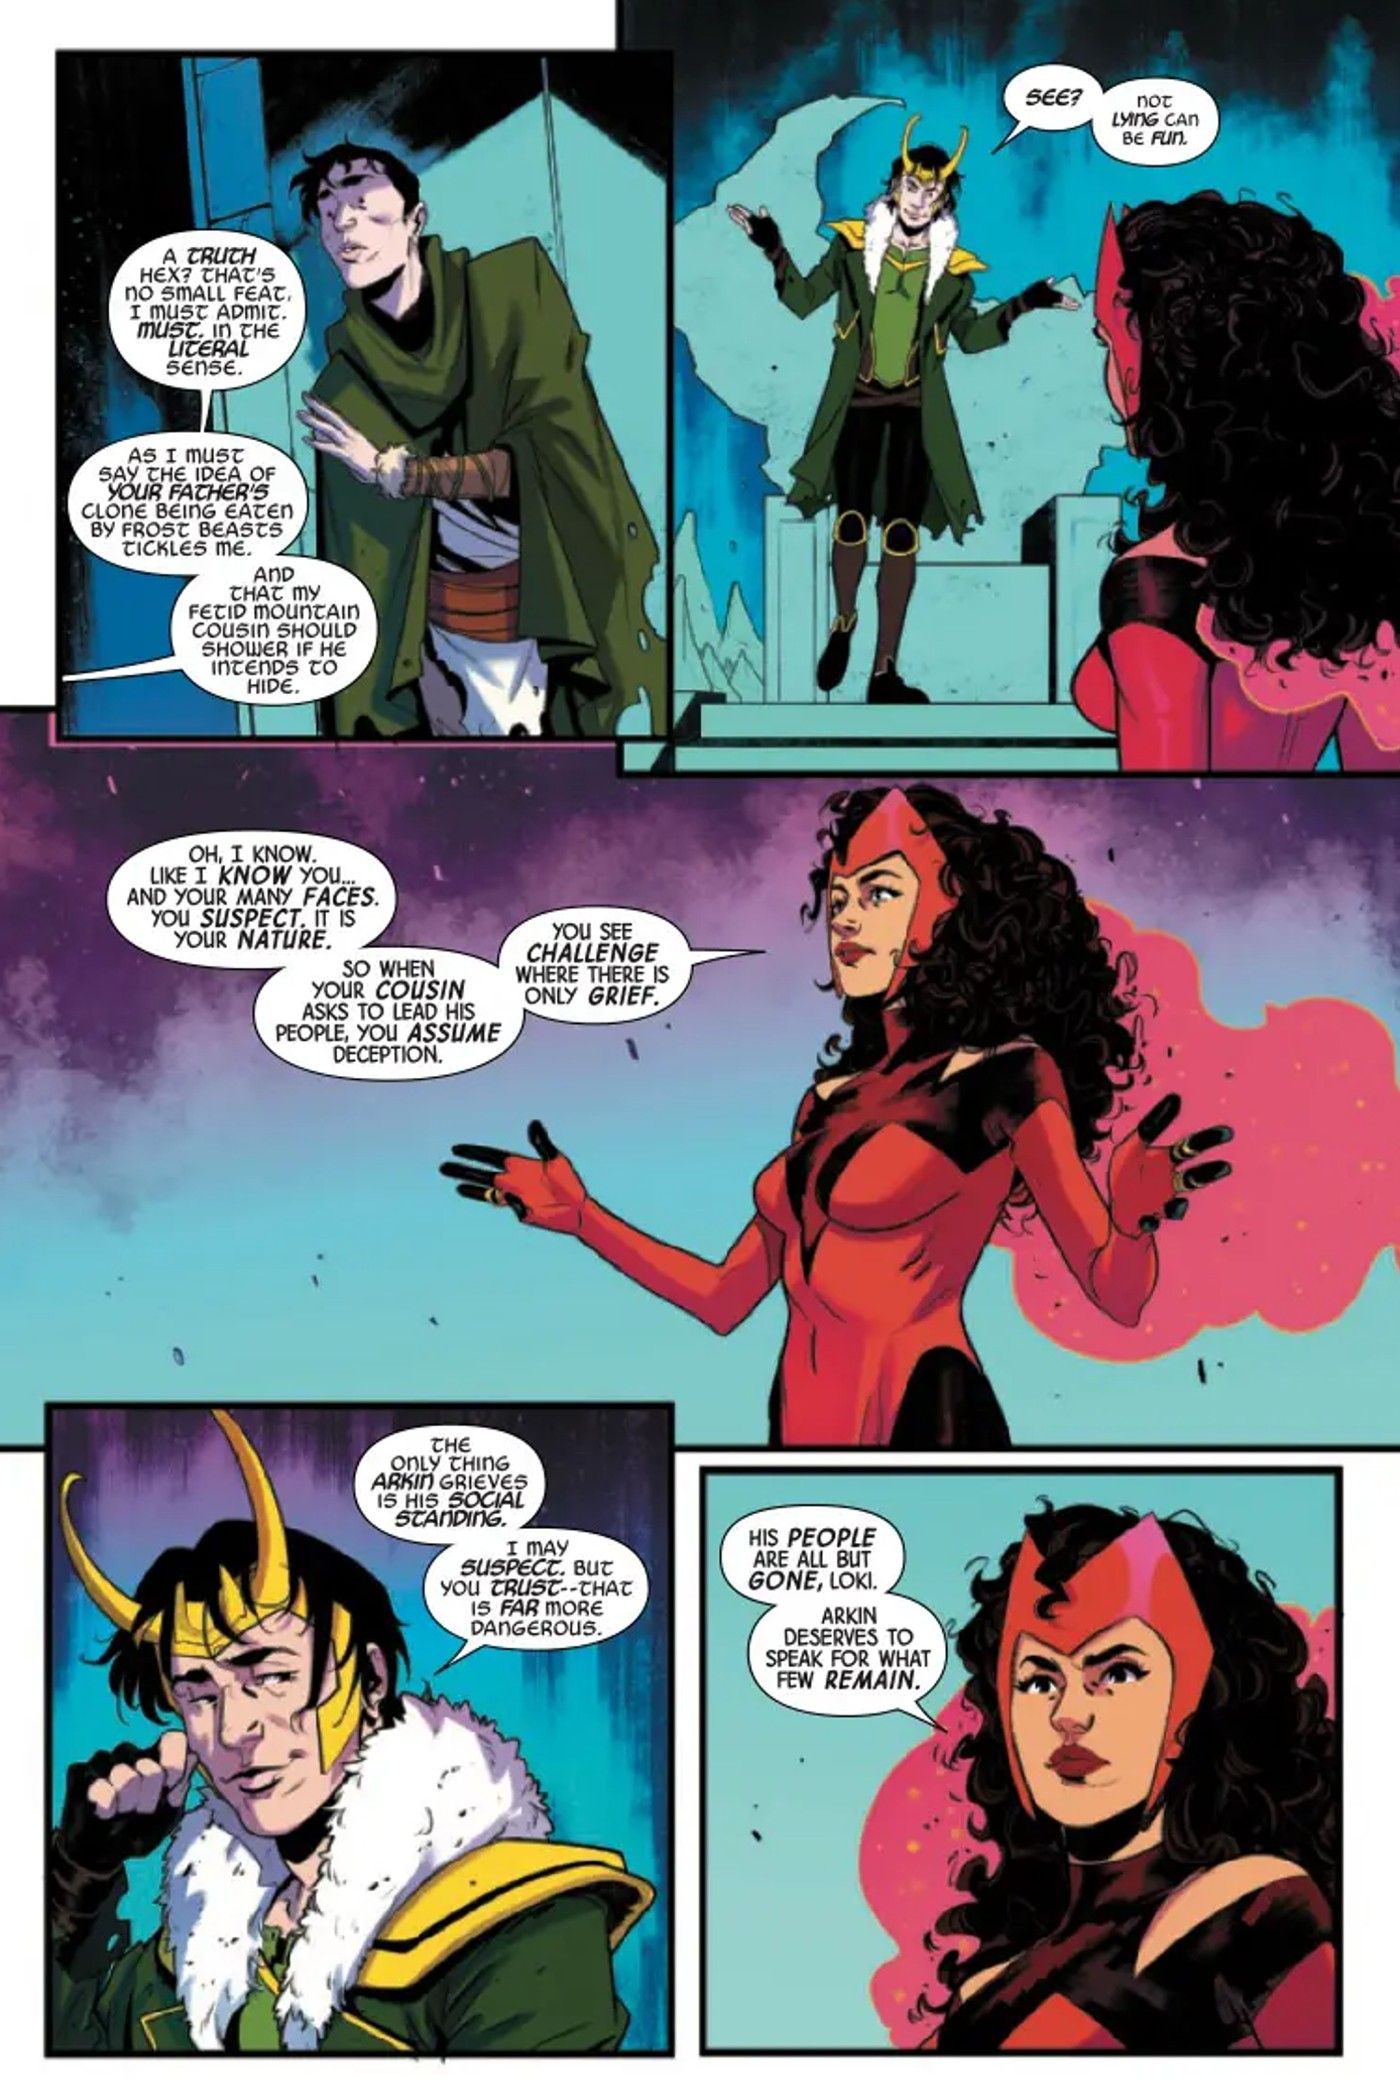 Scarlet Witch vs Loki Begins with 1 Spell That Changes Everything